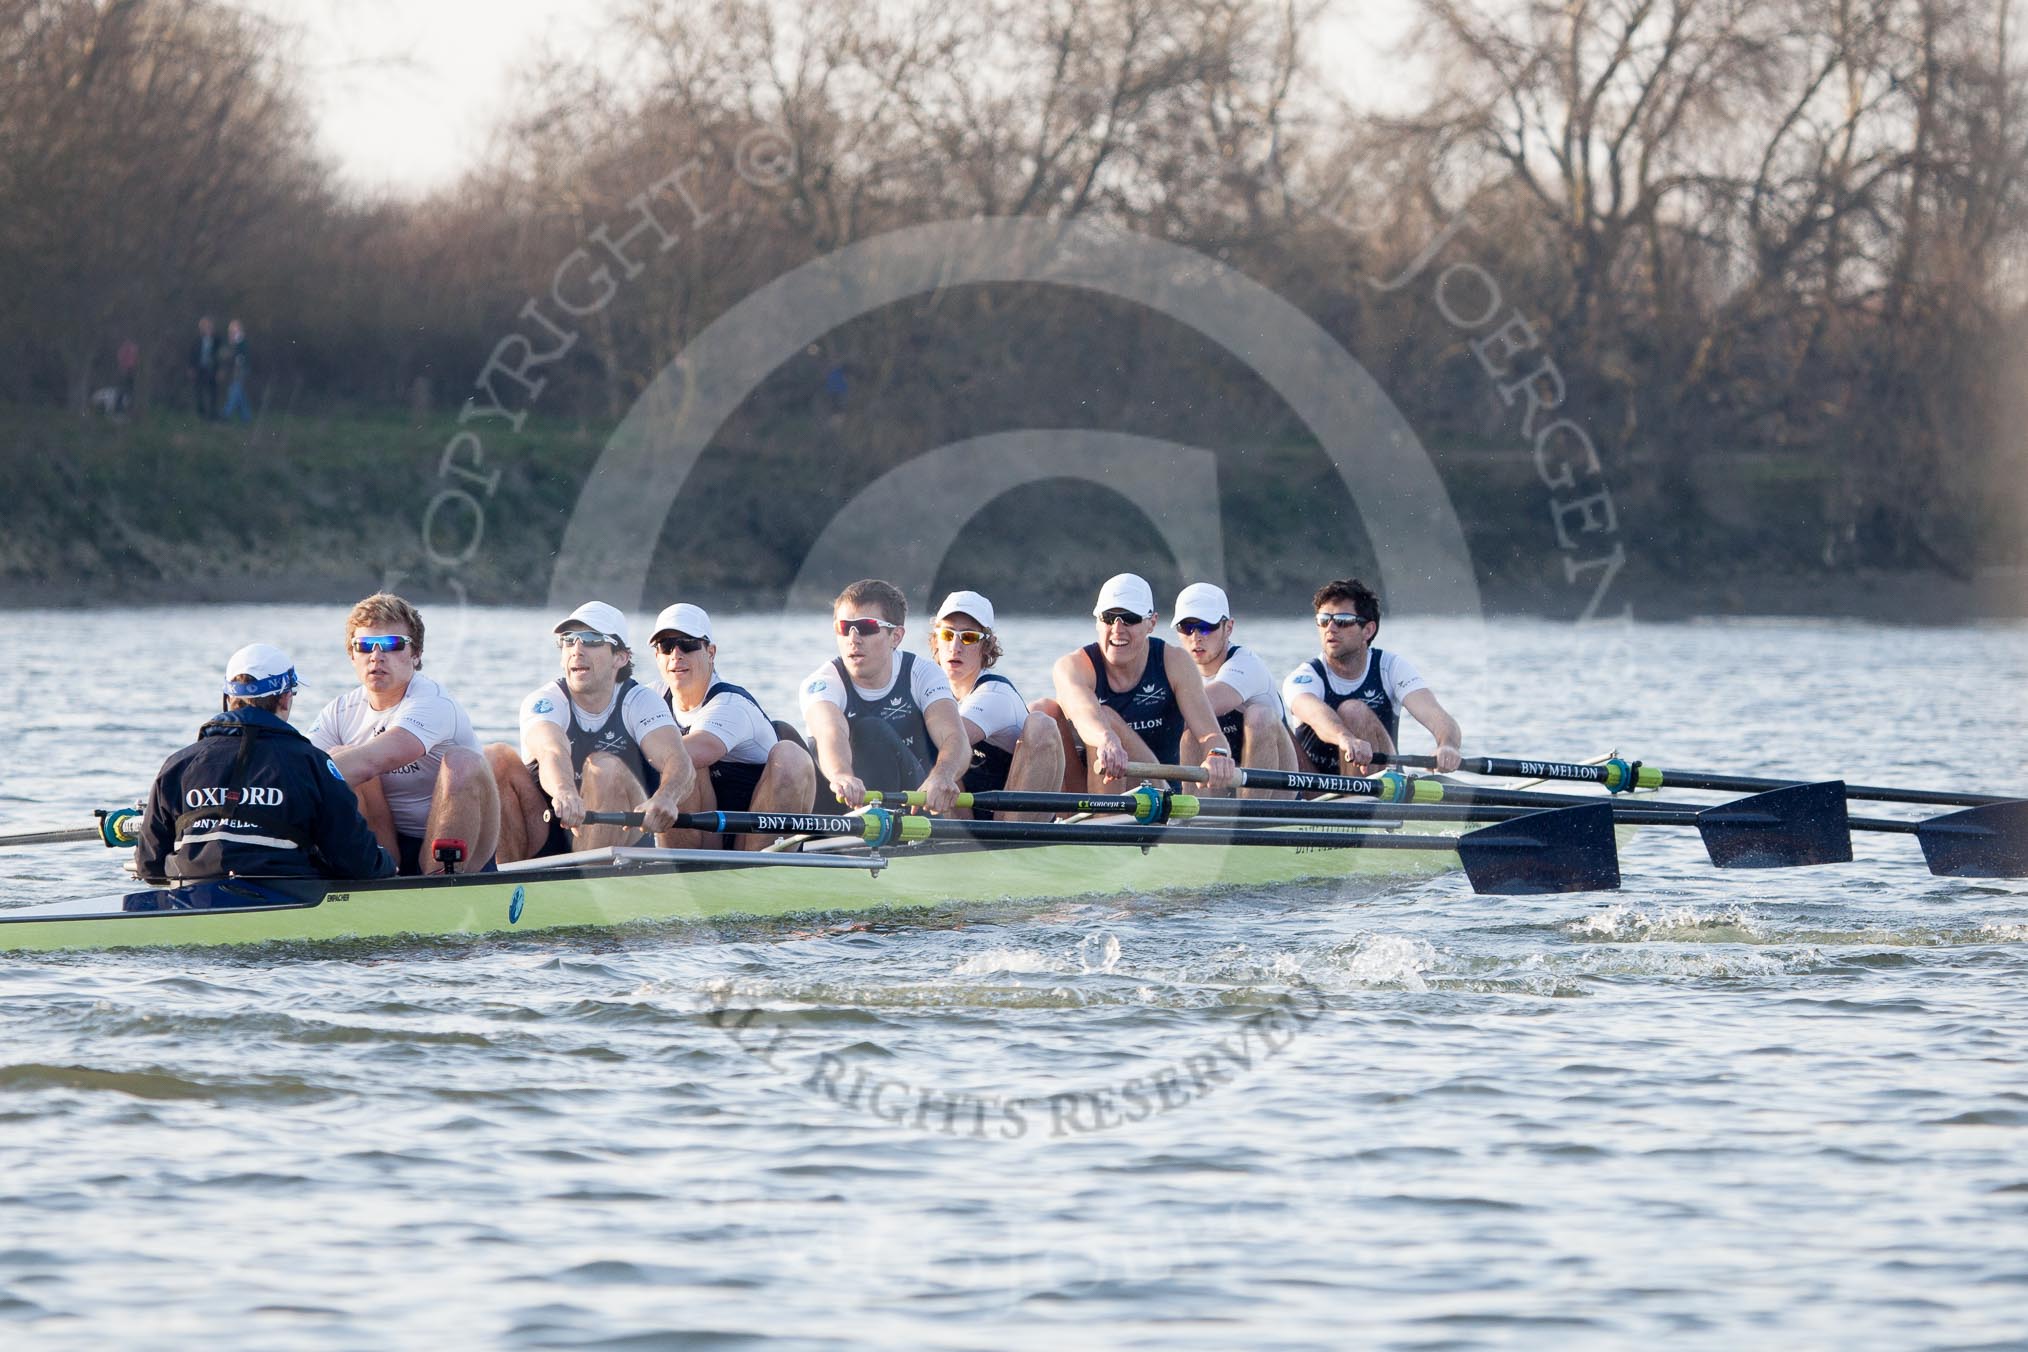 The Boat Race season 2014 - fixture OUBC vs German U23: The OUBC boat near the Mile Post..
River Thames between Putney Bridge and Chiswick Bridge,



on 08 March 2014 at 16:49, image #90